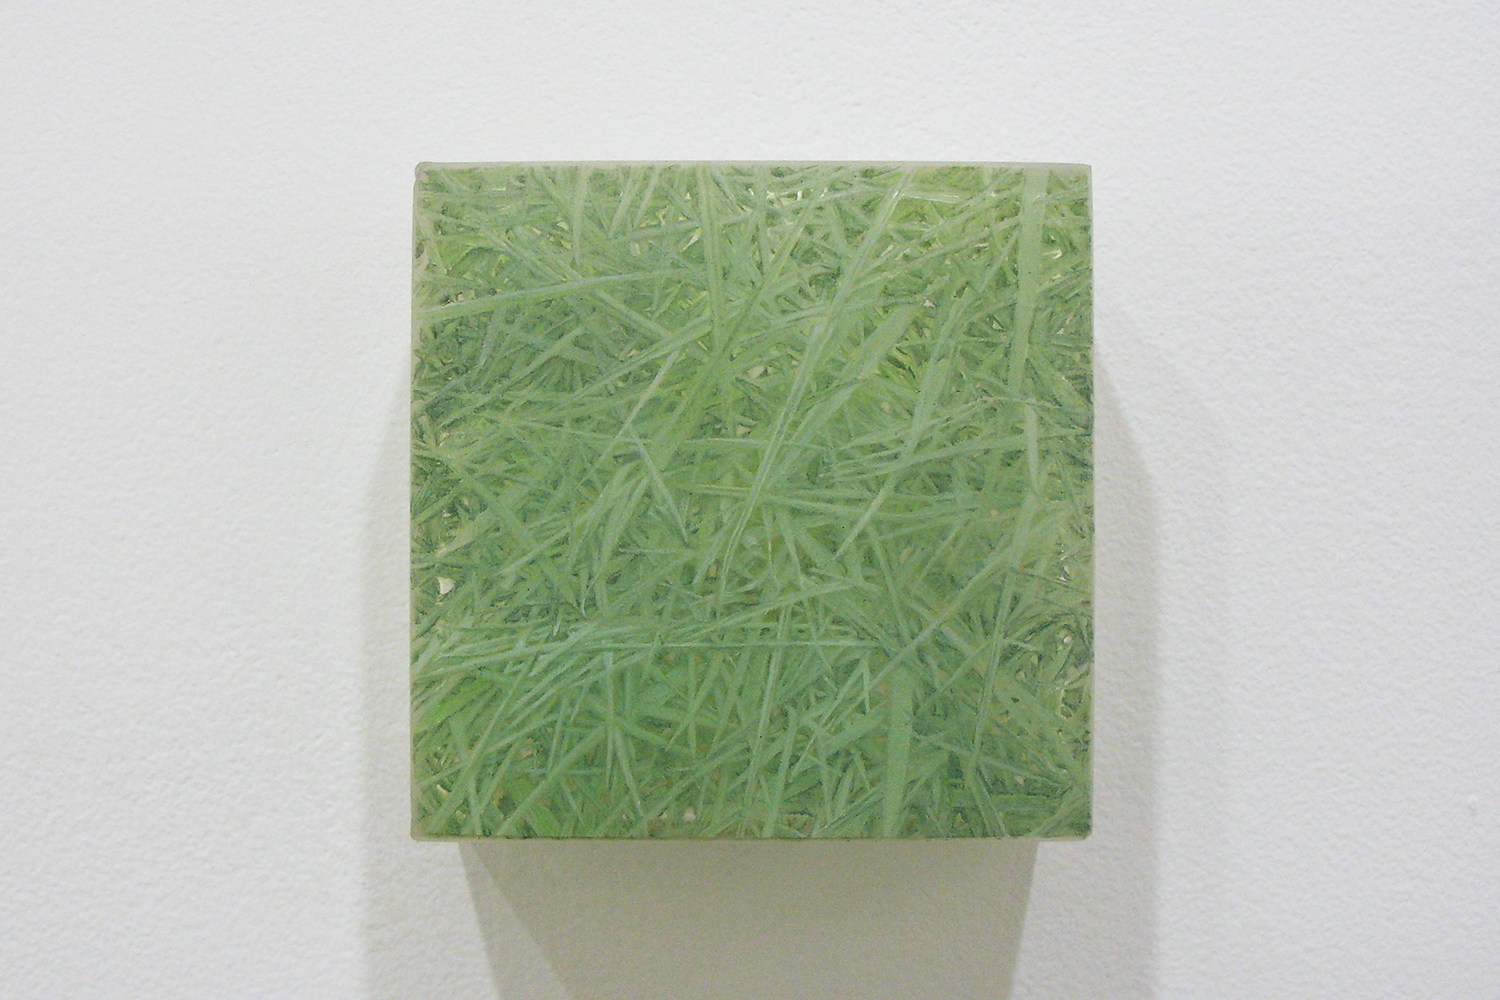 Photo-painting 草上のかおり｜Scent on the grass ｜7.5 x 7.5 x 3 cm｜Oil on FRP, mixed media｜ 2009